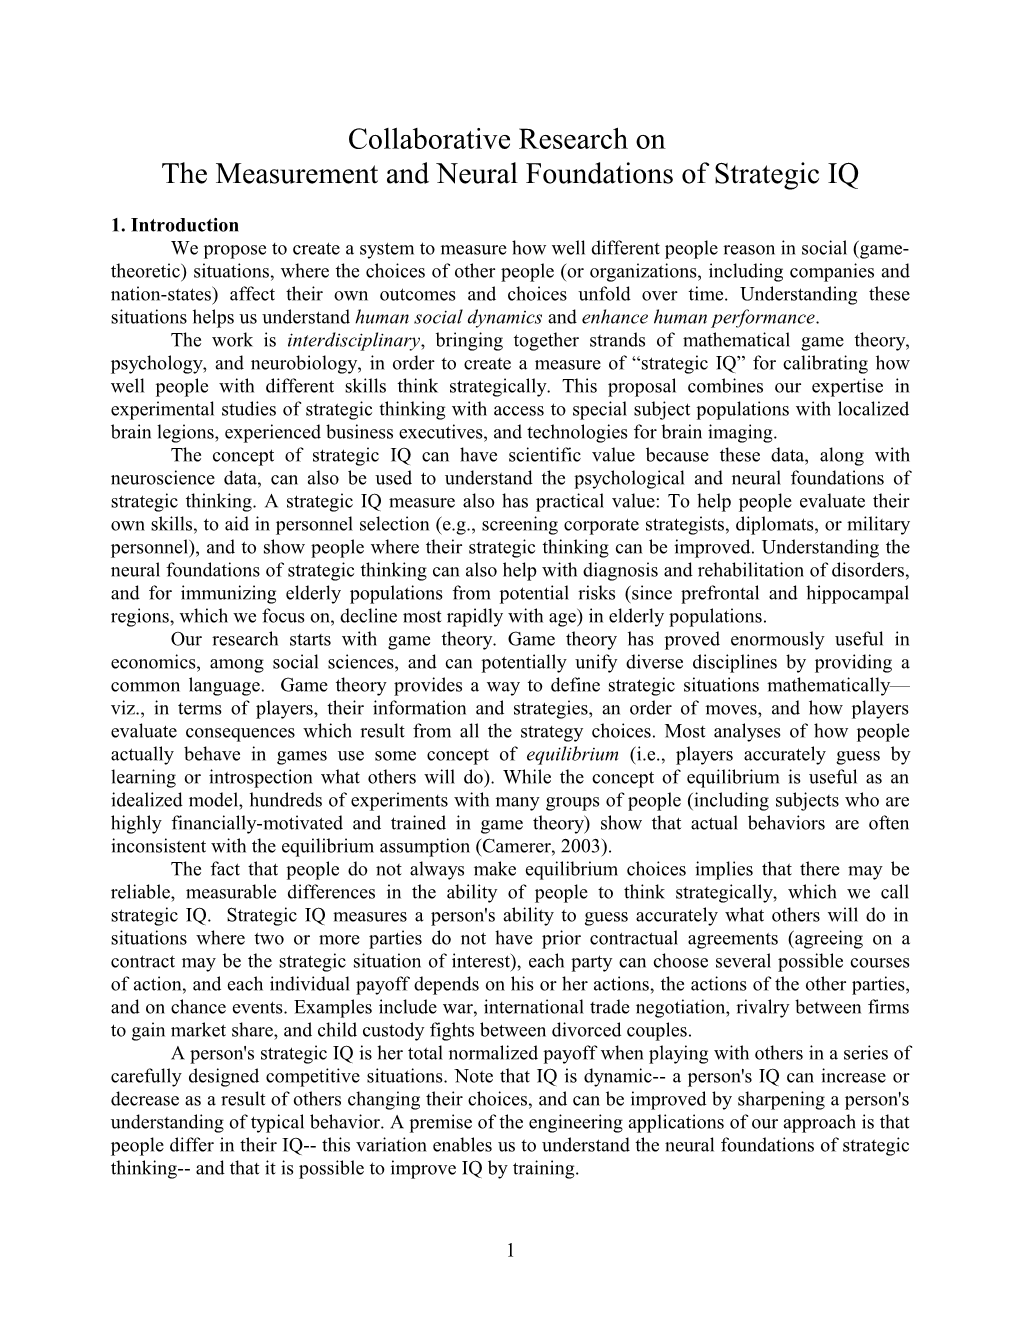 The Measurement and Neural Foundations